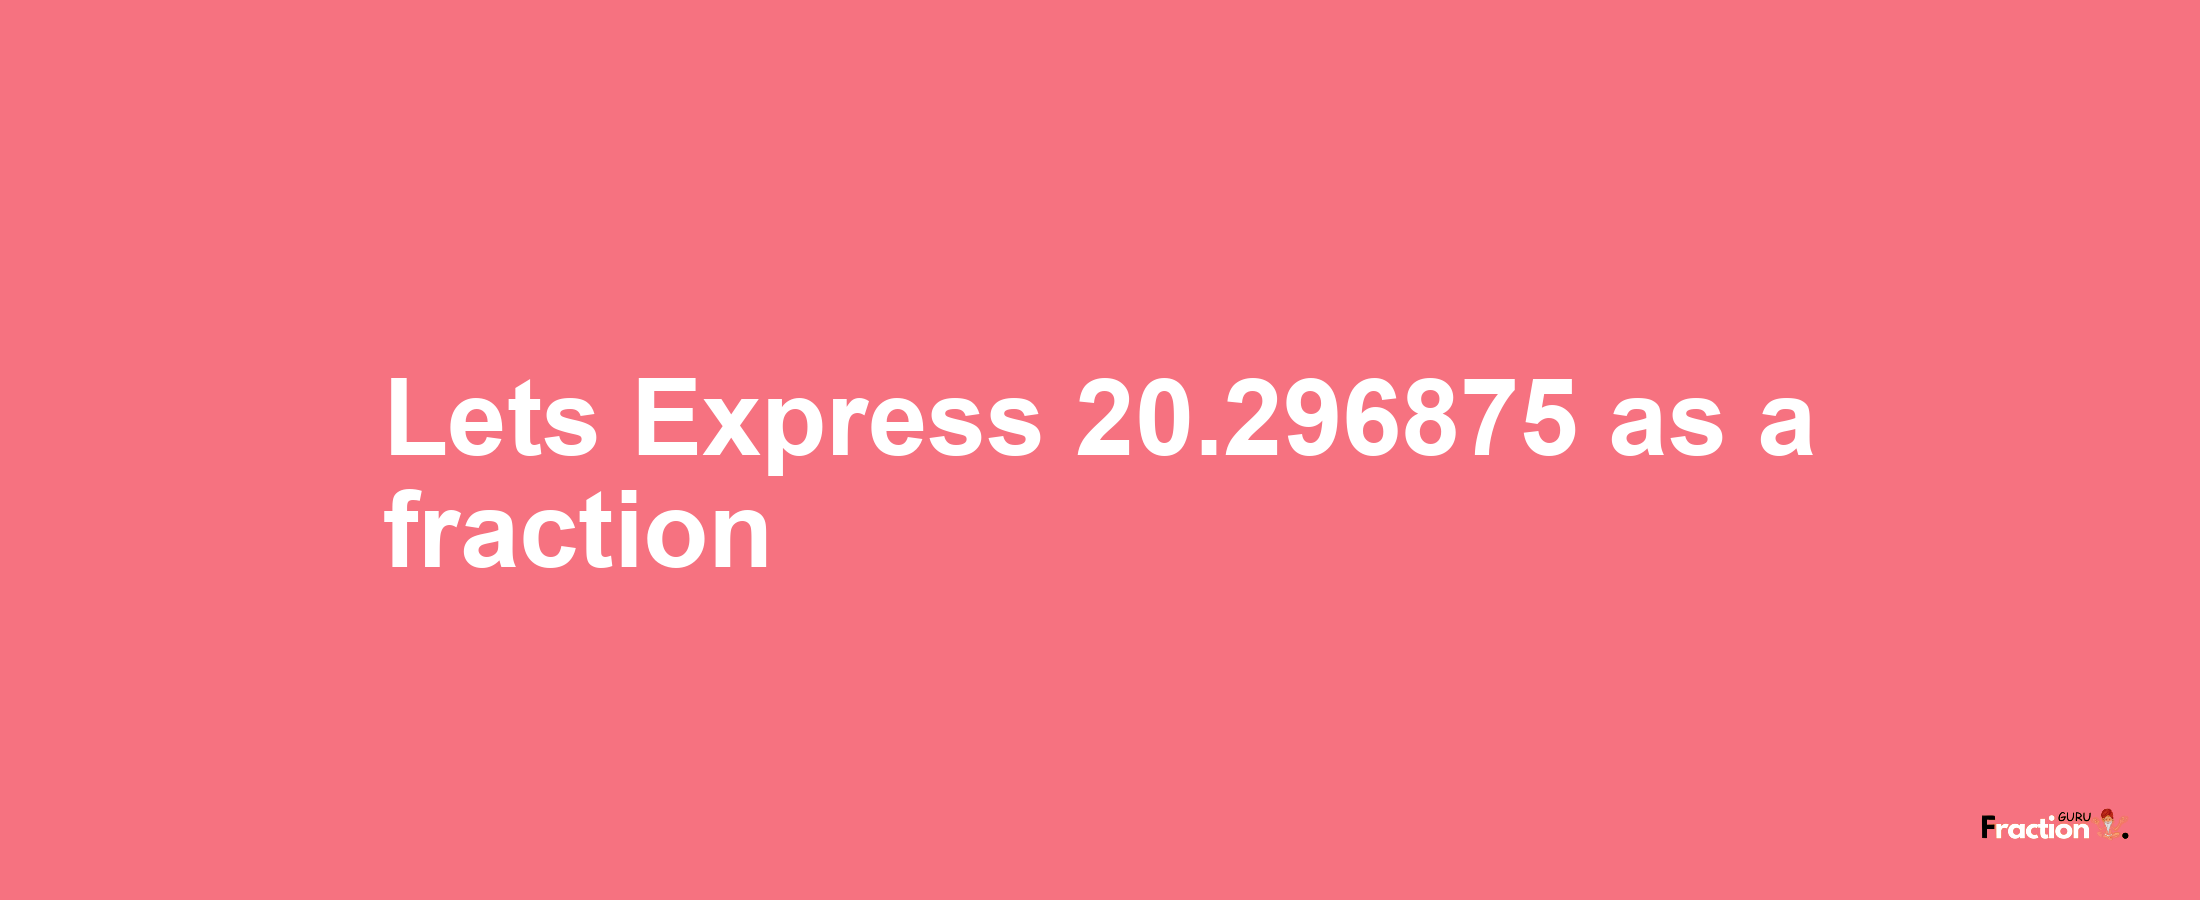 Lets Express 20.296875 as afraction